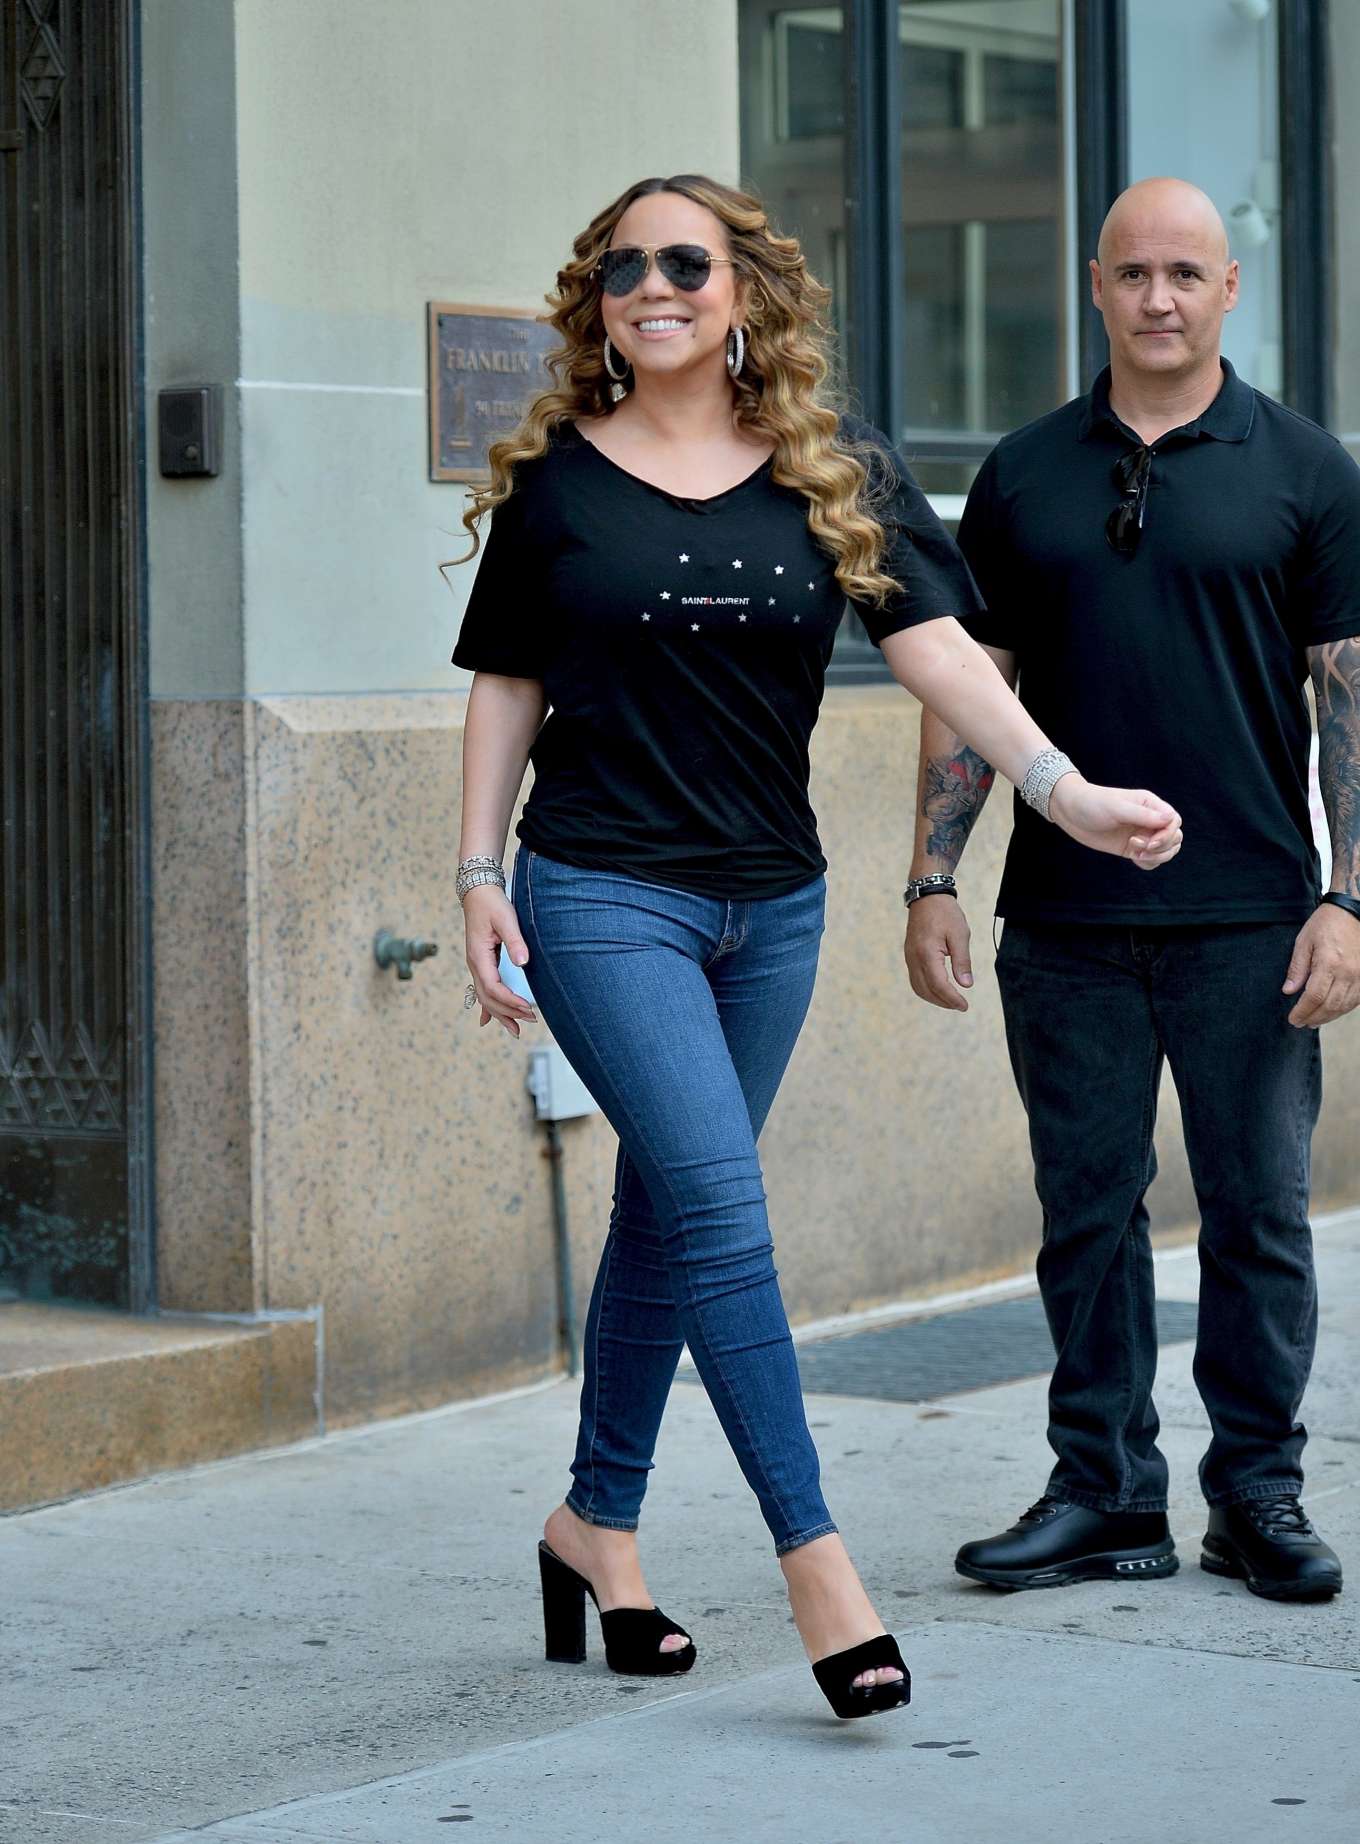 Mariah Carey â€“ In Jeans All smiles while out in New York City